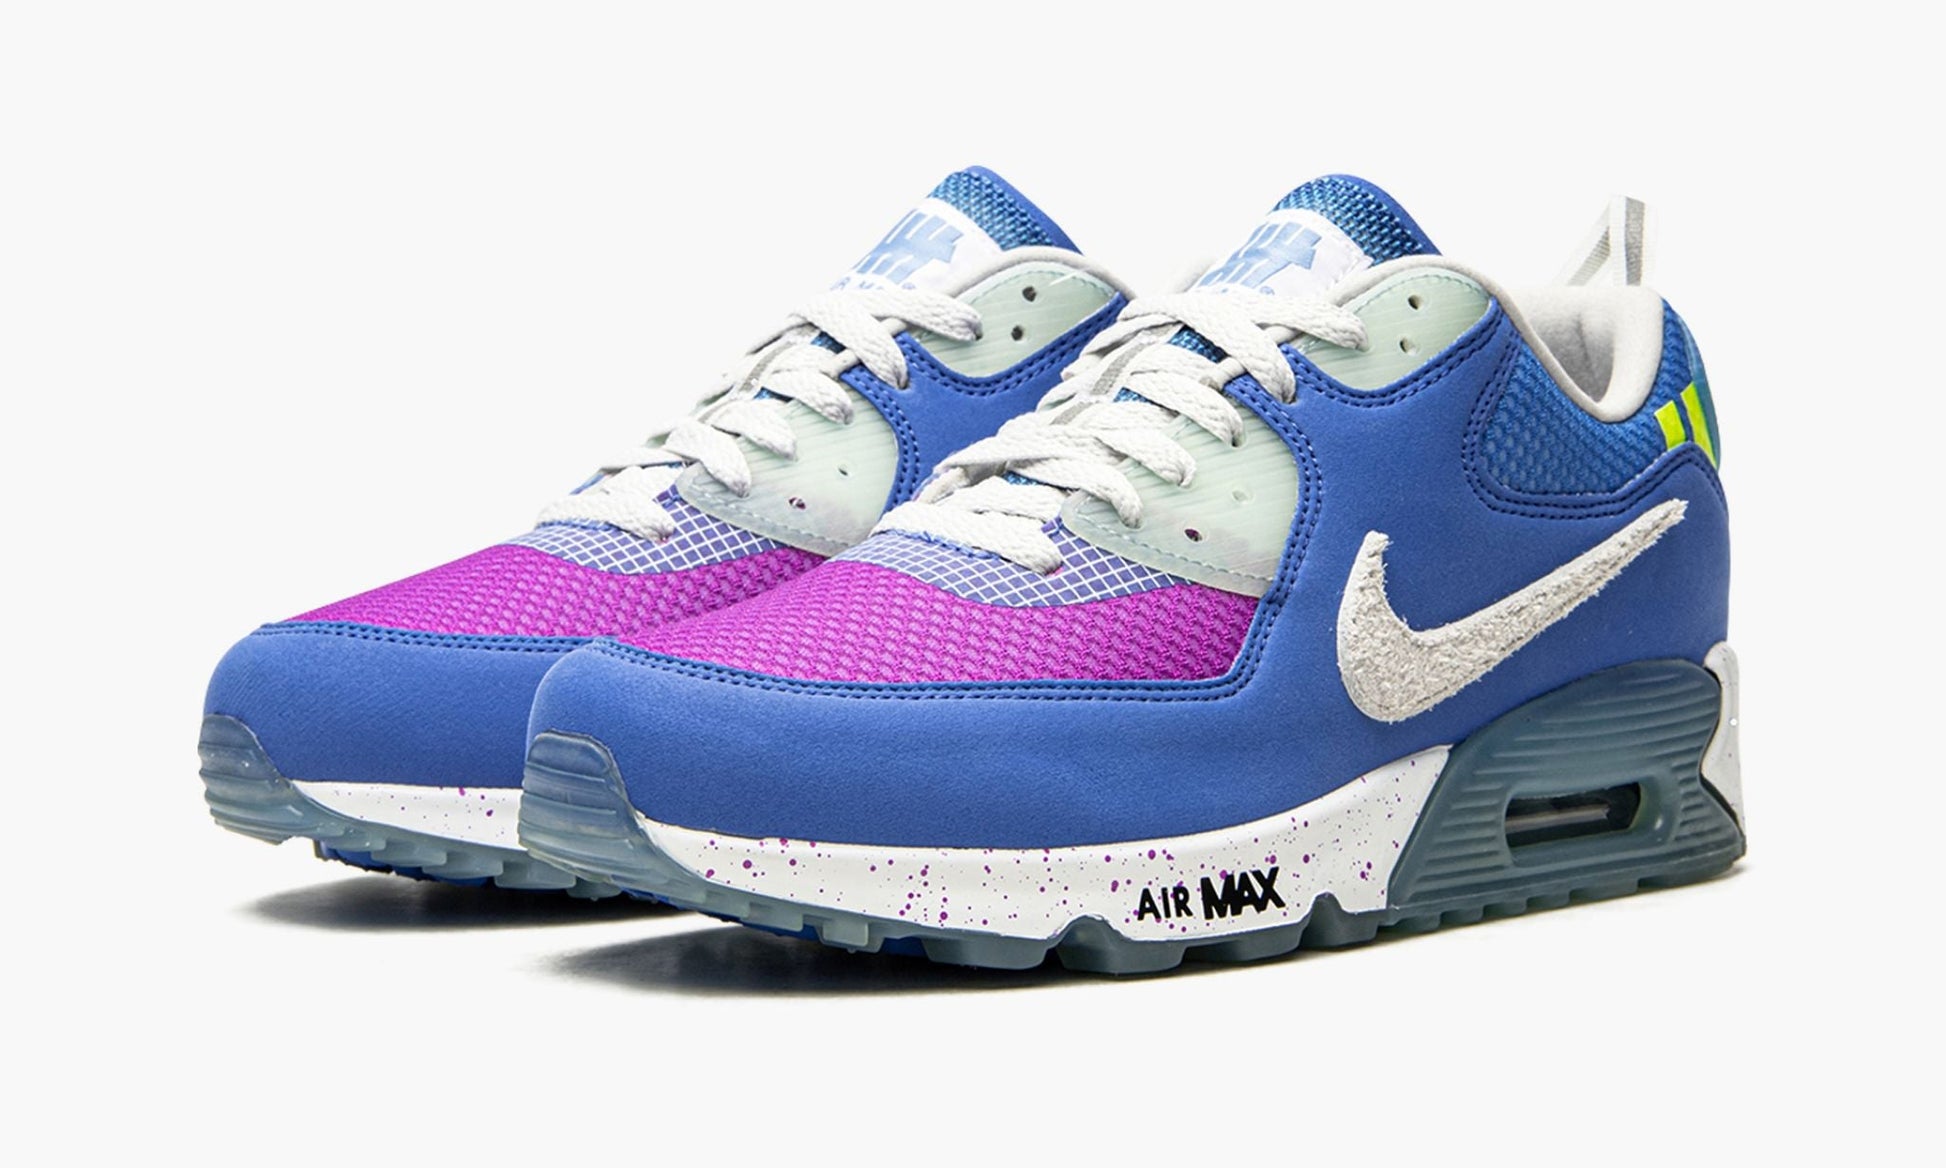 Air Max 90 "Undefeated - Pacific Blue"